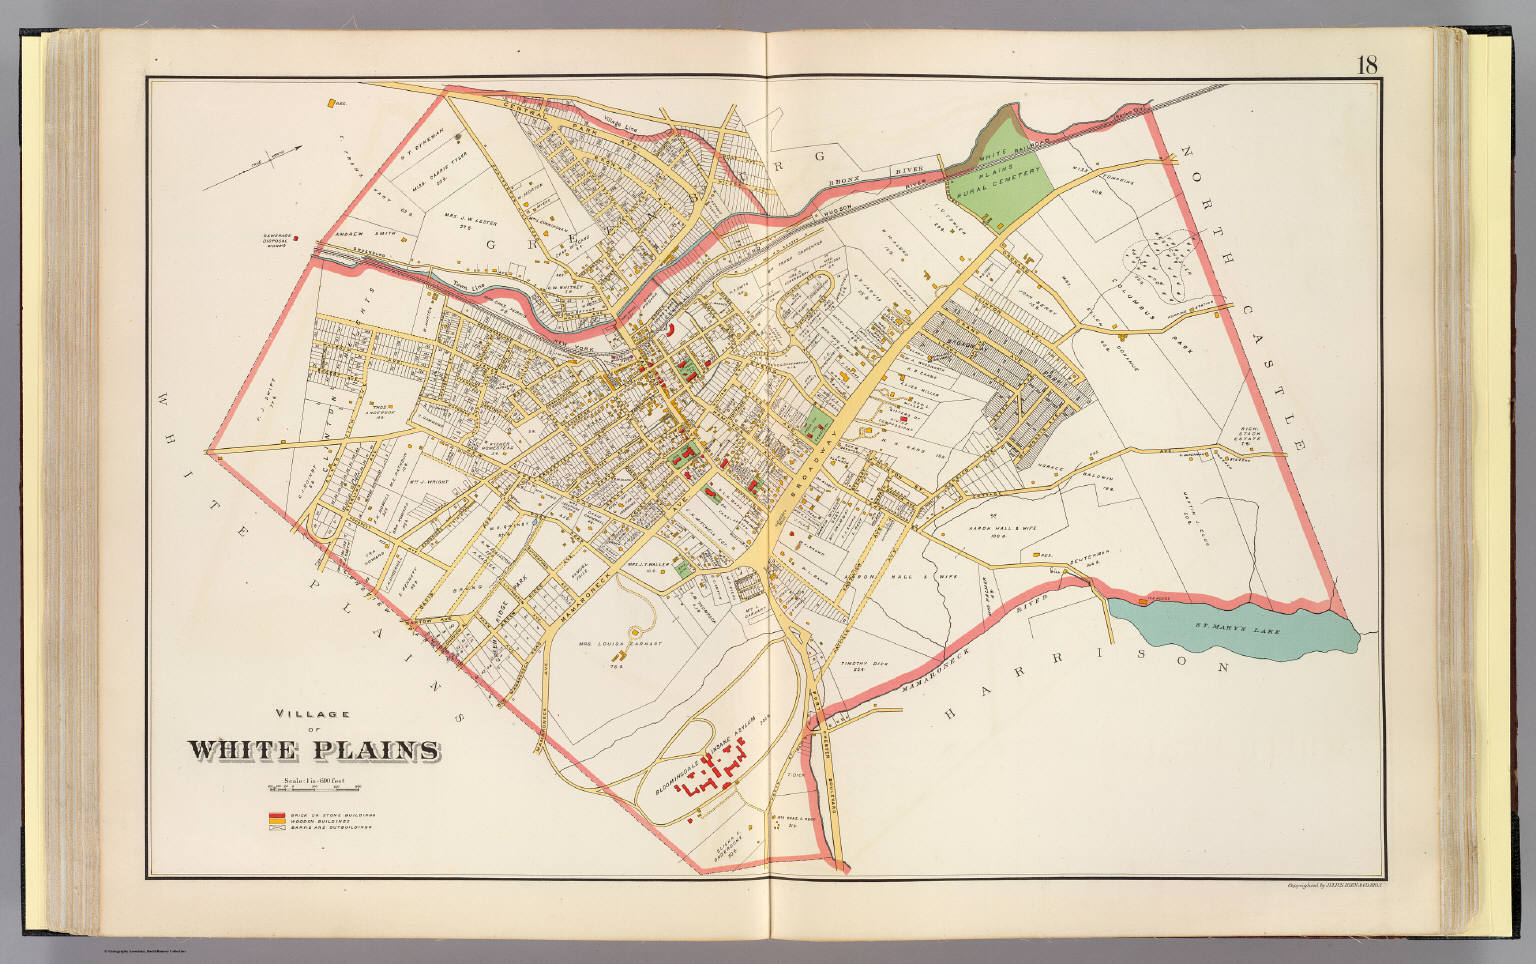 White Plains. David Rumsey Historical Map Collection